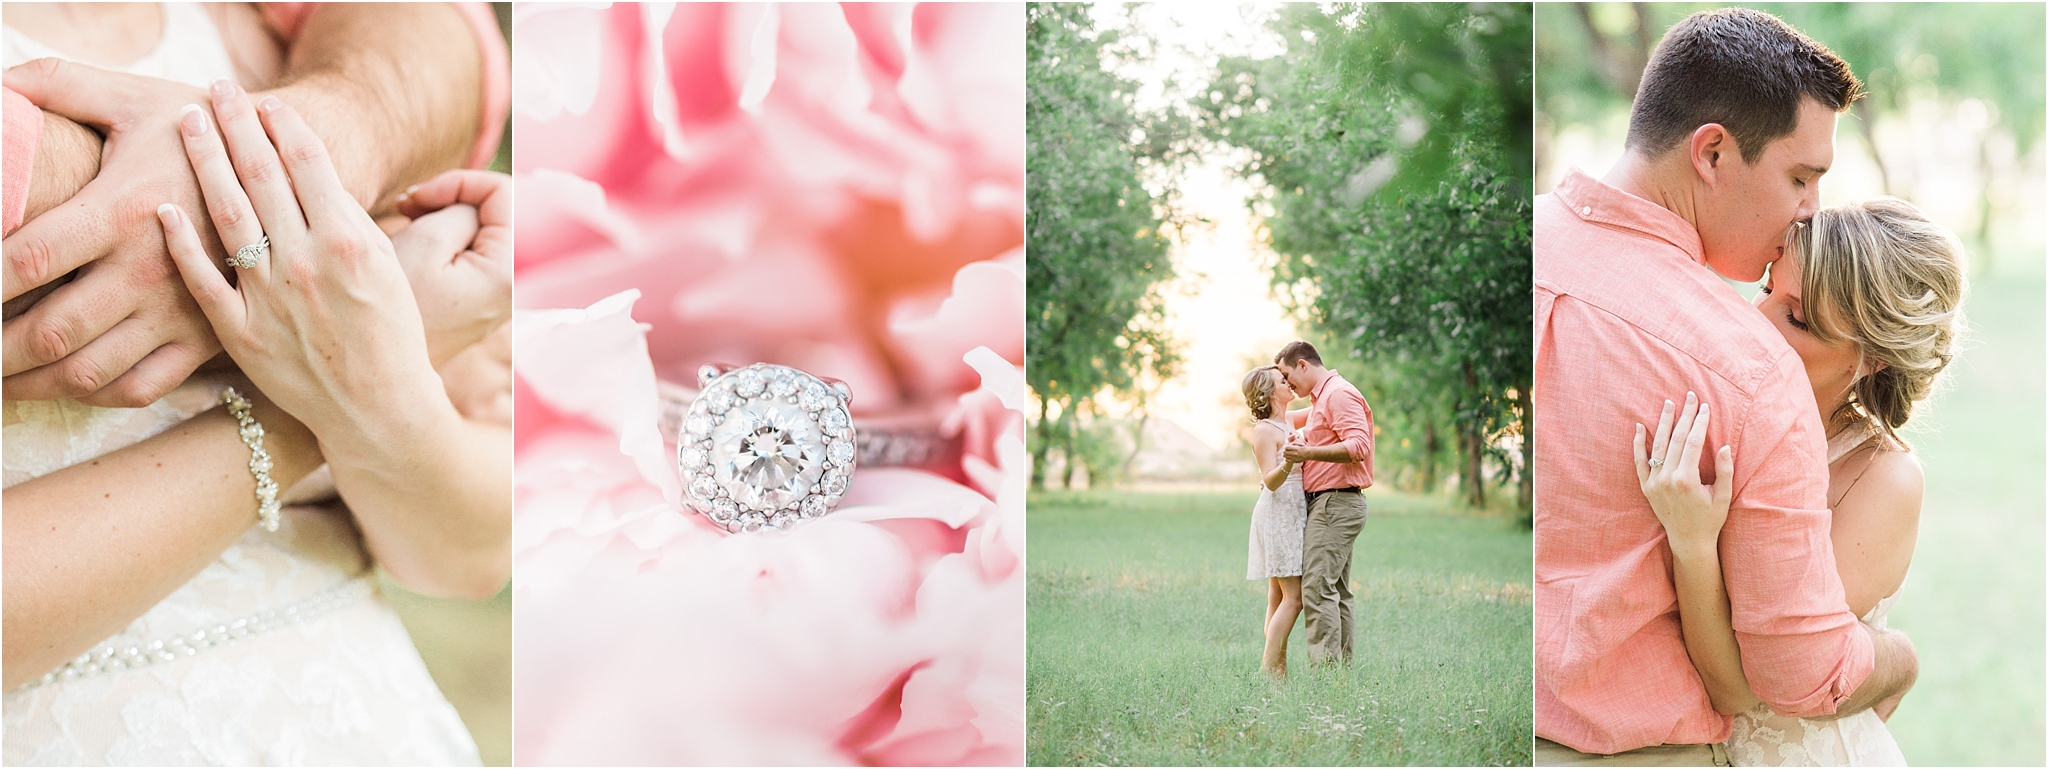 Amazing Outfit Ideas For Your Engagement Session | Tucson Wedding Photographer | Bryan and Anh of West End Photography